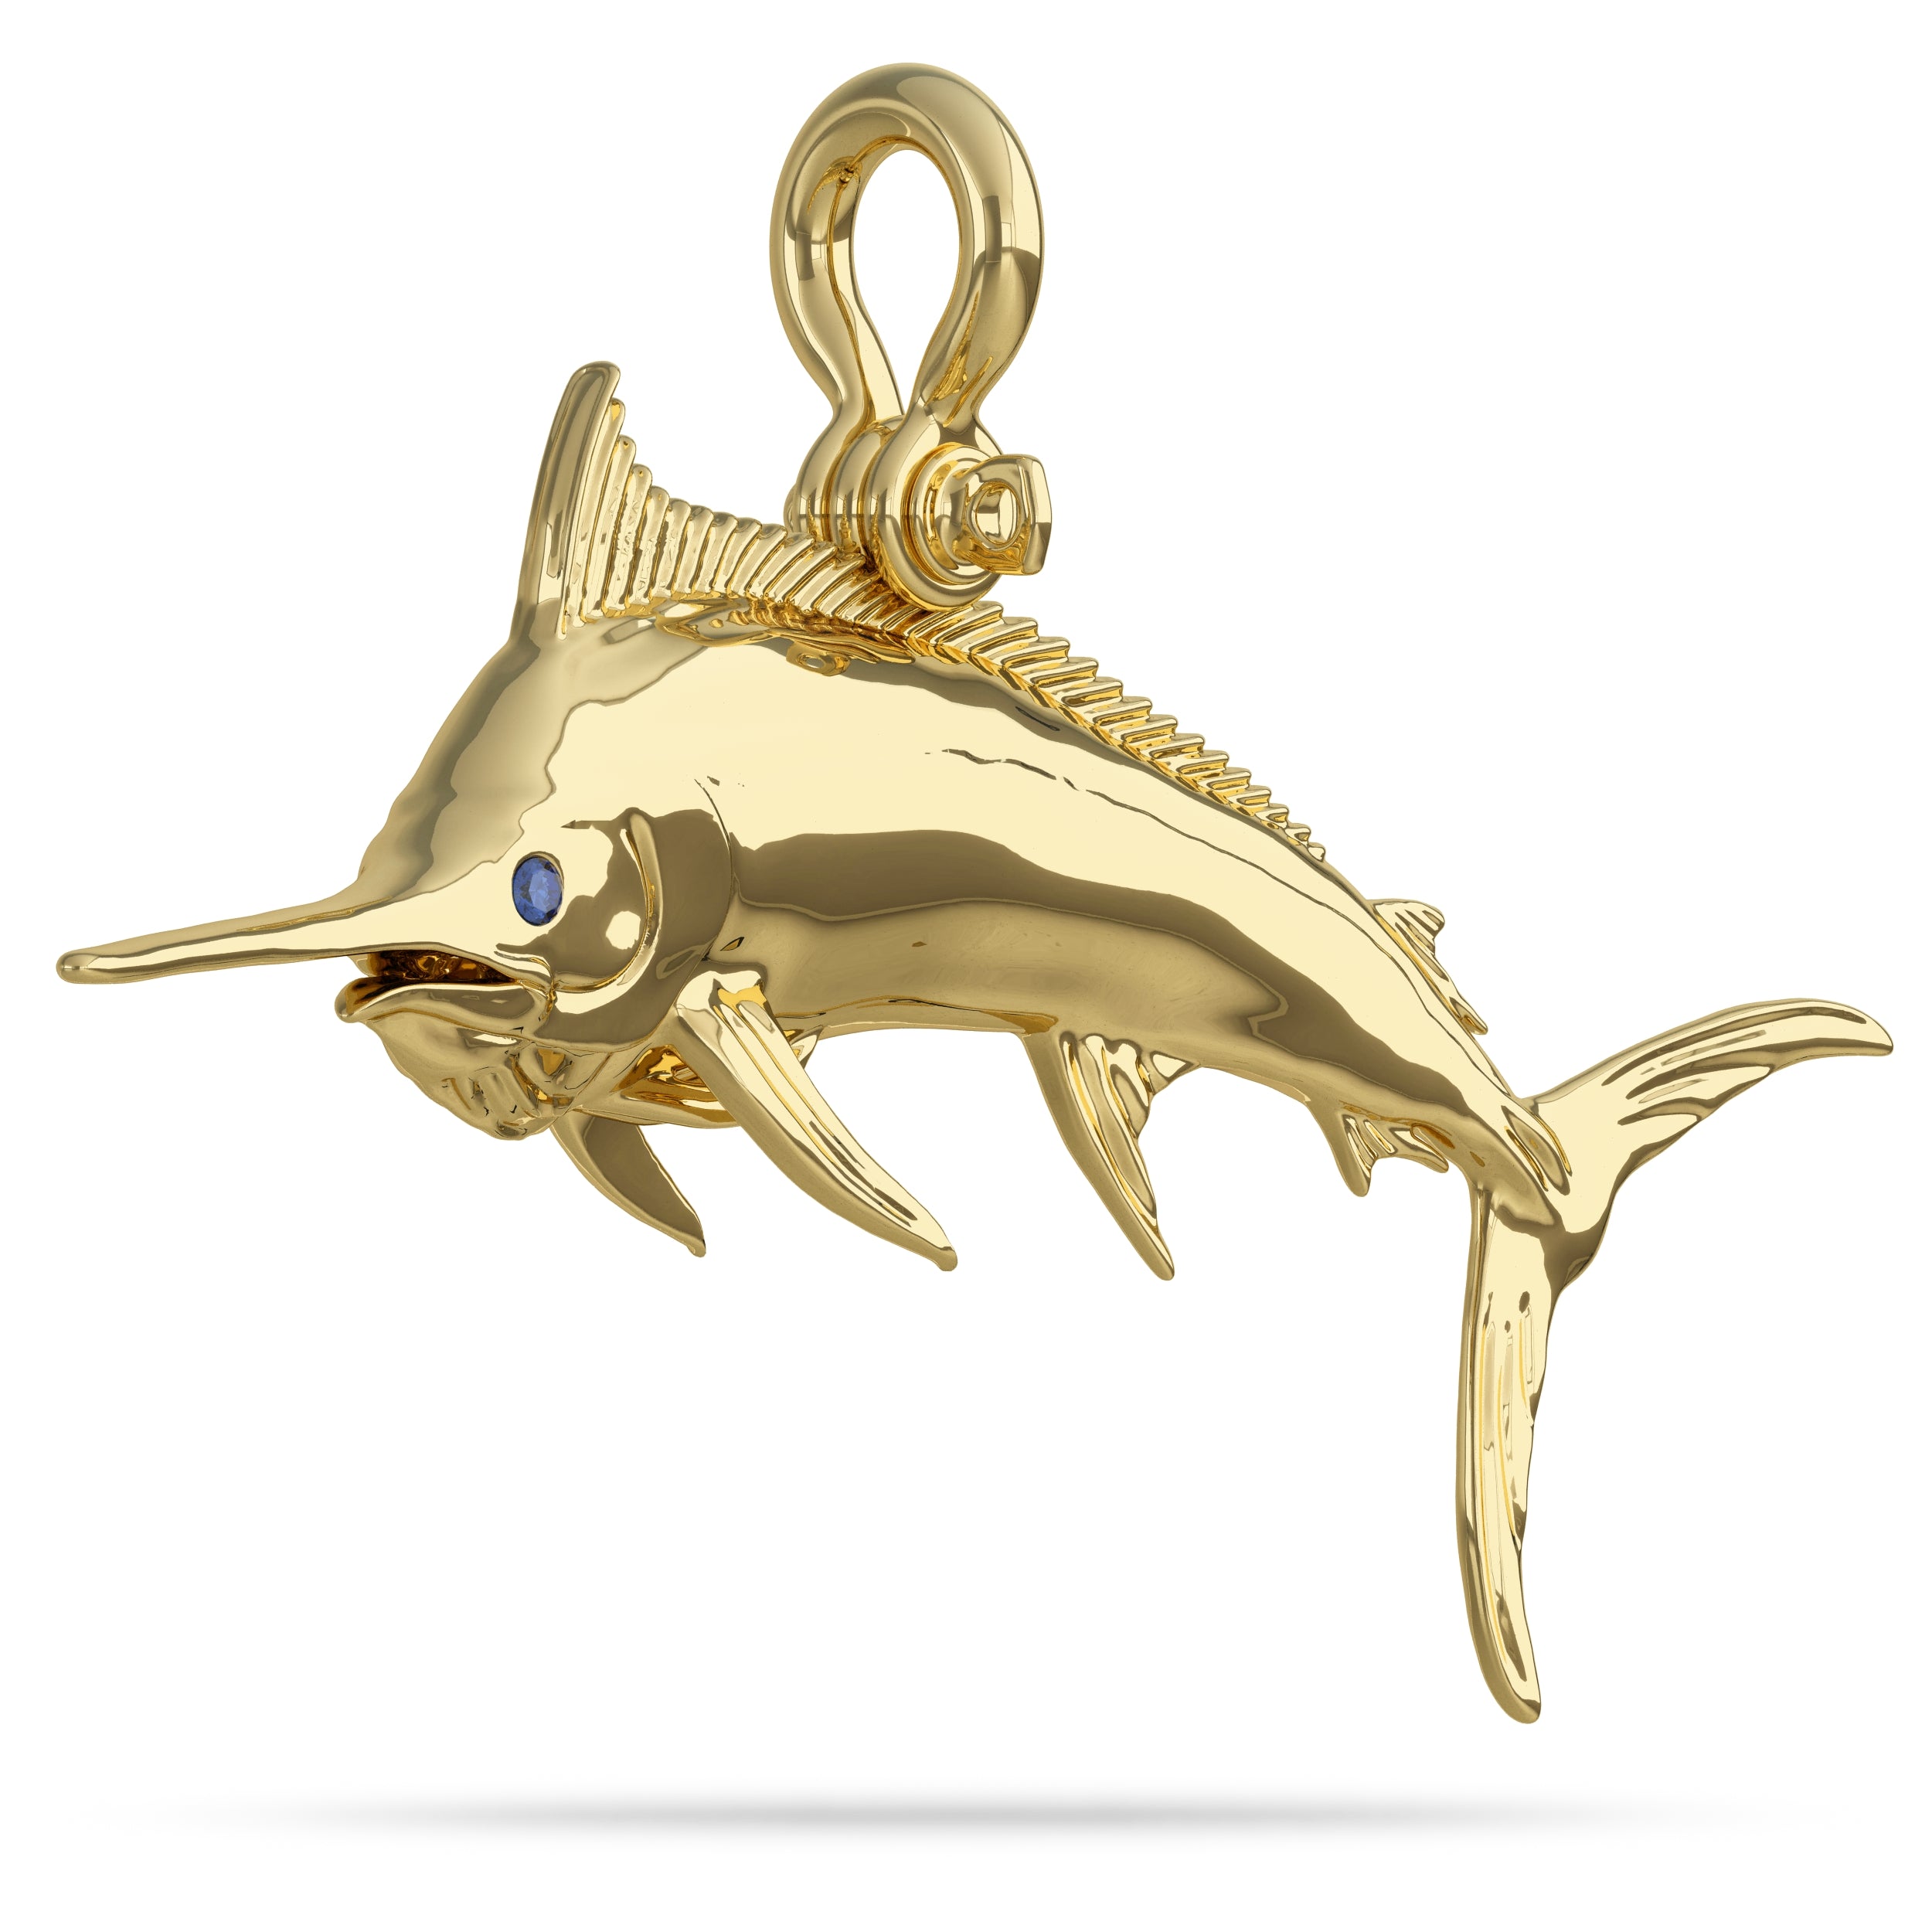 Solid 14k Gold Pacific Black Marlin Pendant High Polished Mirror Finish With Blue Sapphire Eye with A Mariner Shackle Bail Custom Designed By Nautical Treasure Jewelry In The Florida Keys The largest Fish in the Ocean 